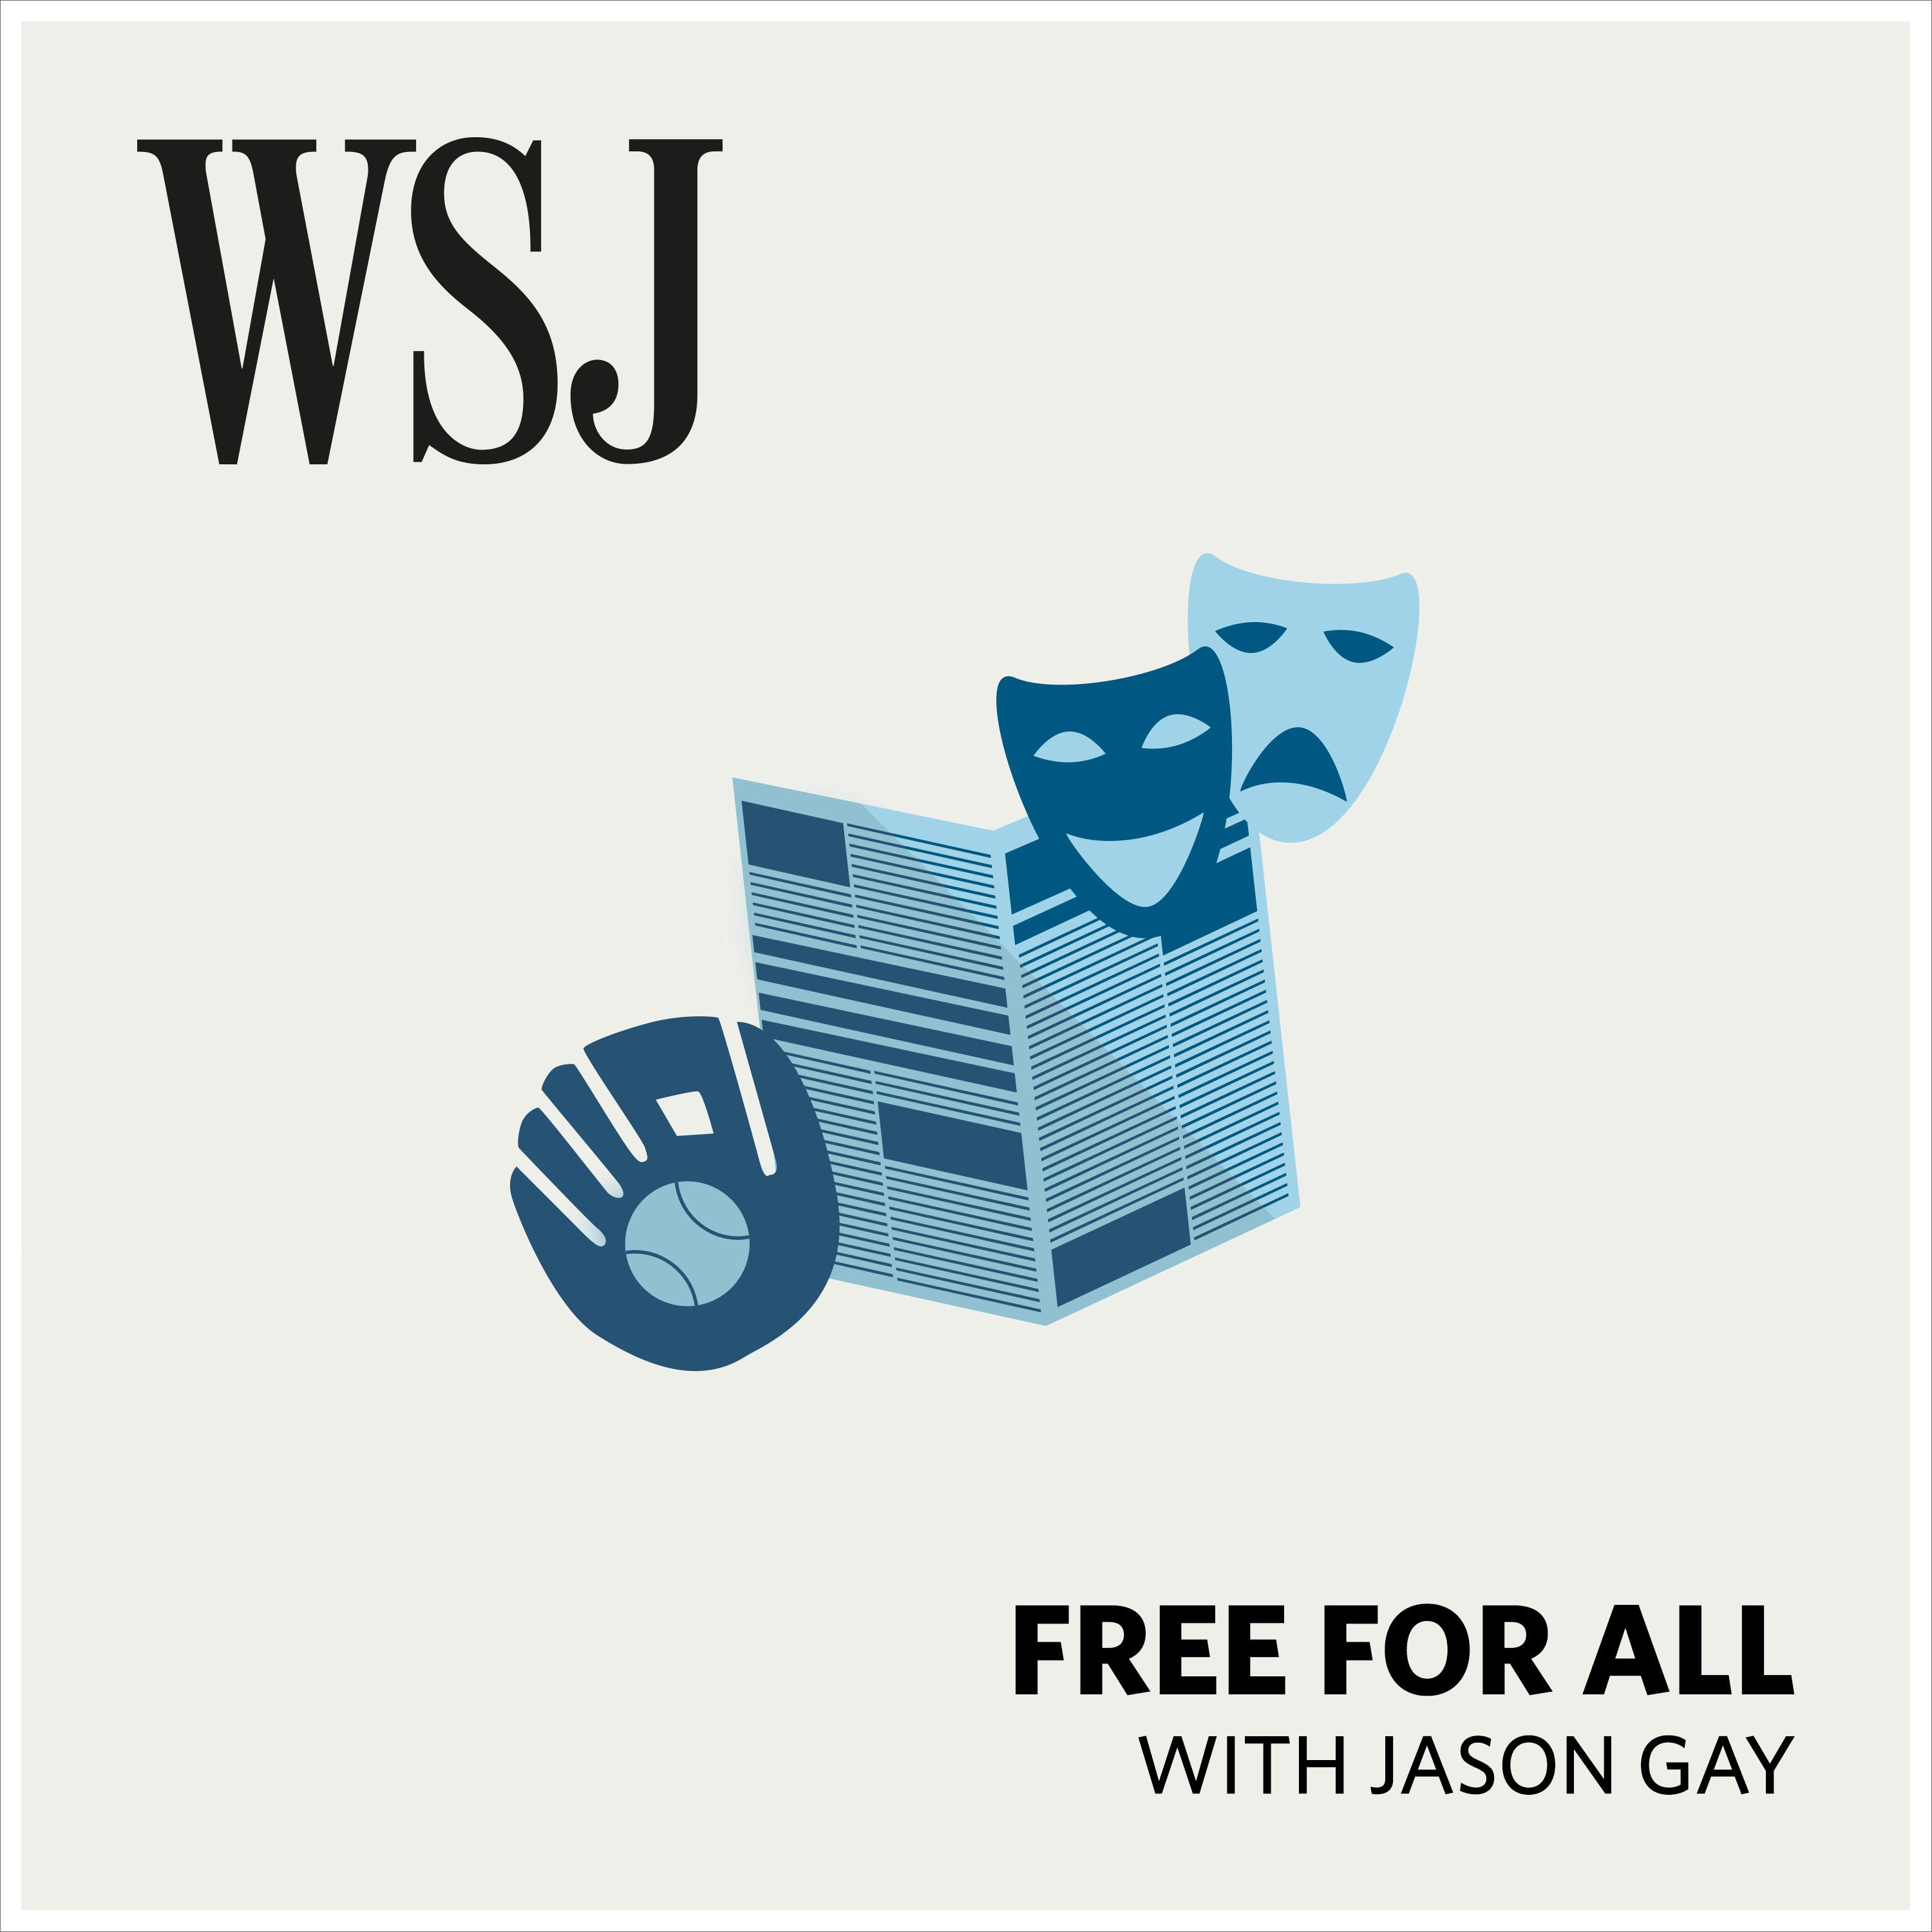 WSJ Free for All with Jason Gay:Jason Gay, The Wall Street Journal